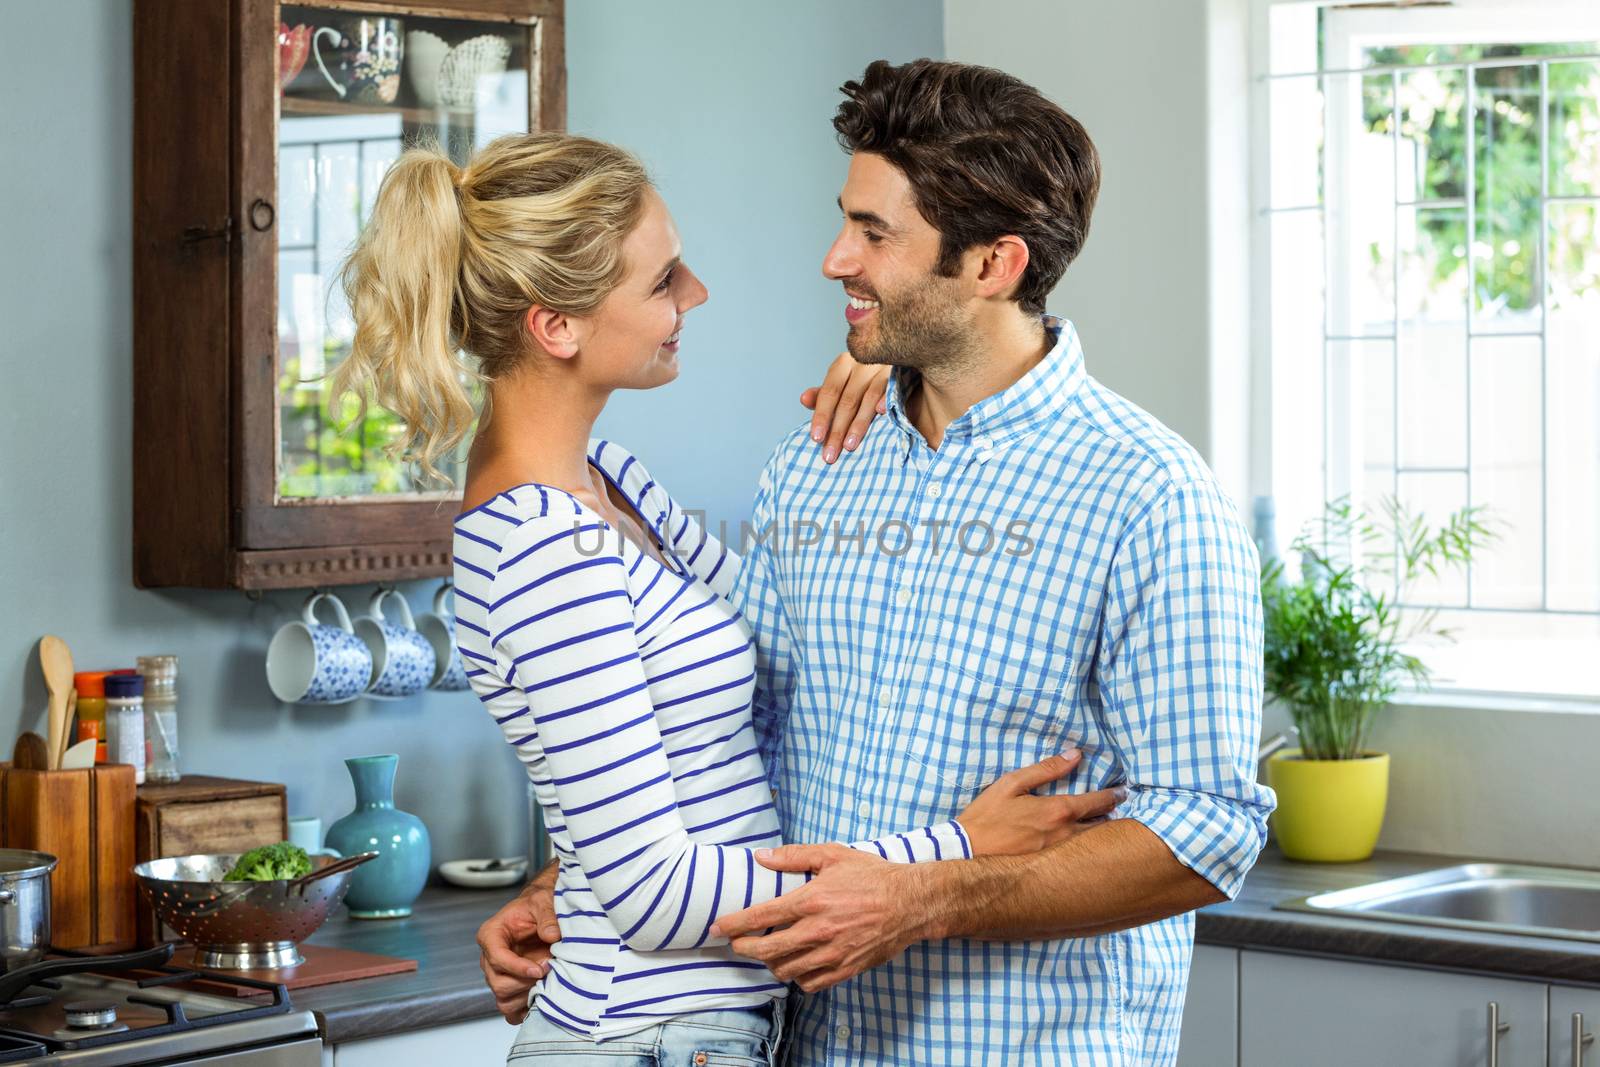 Romantic couple embracing each other in kitchen